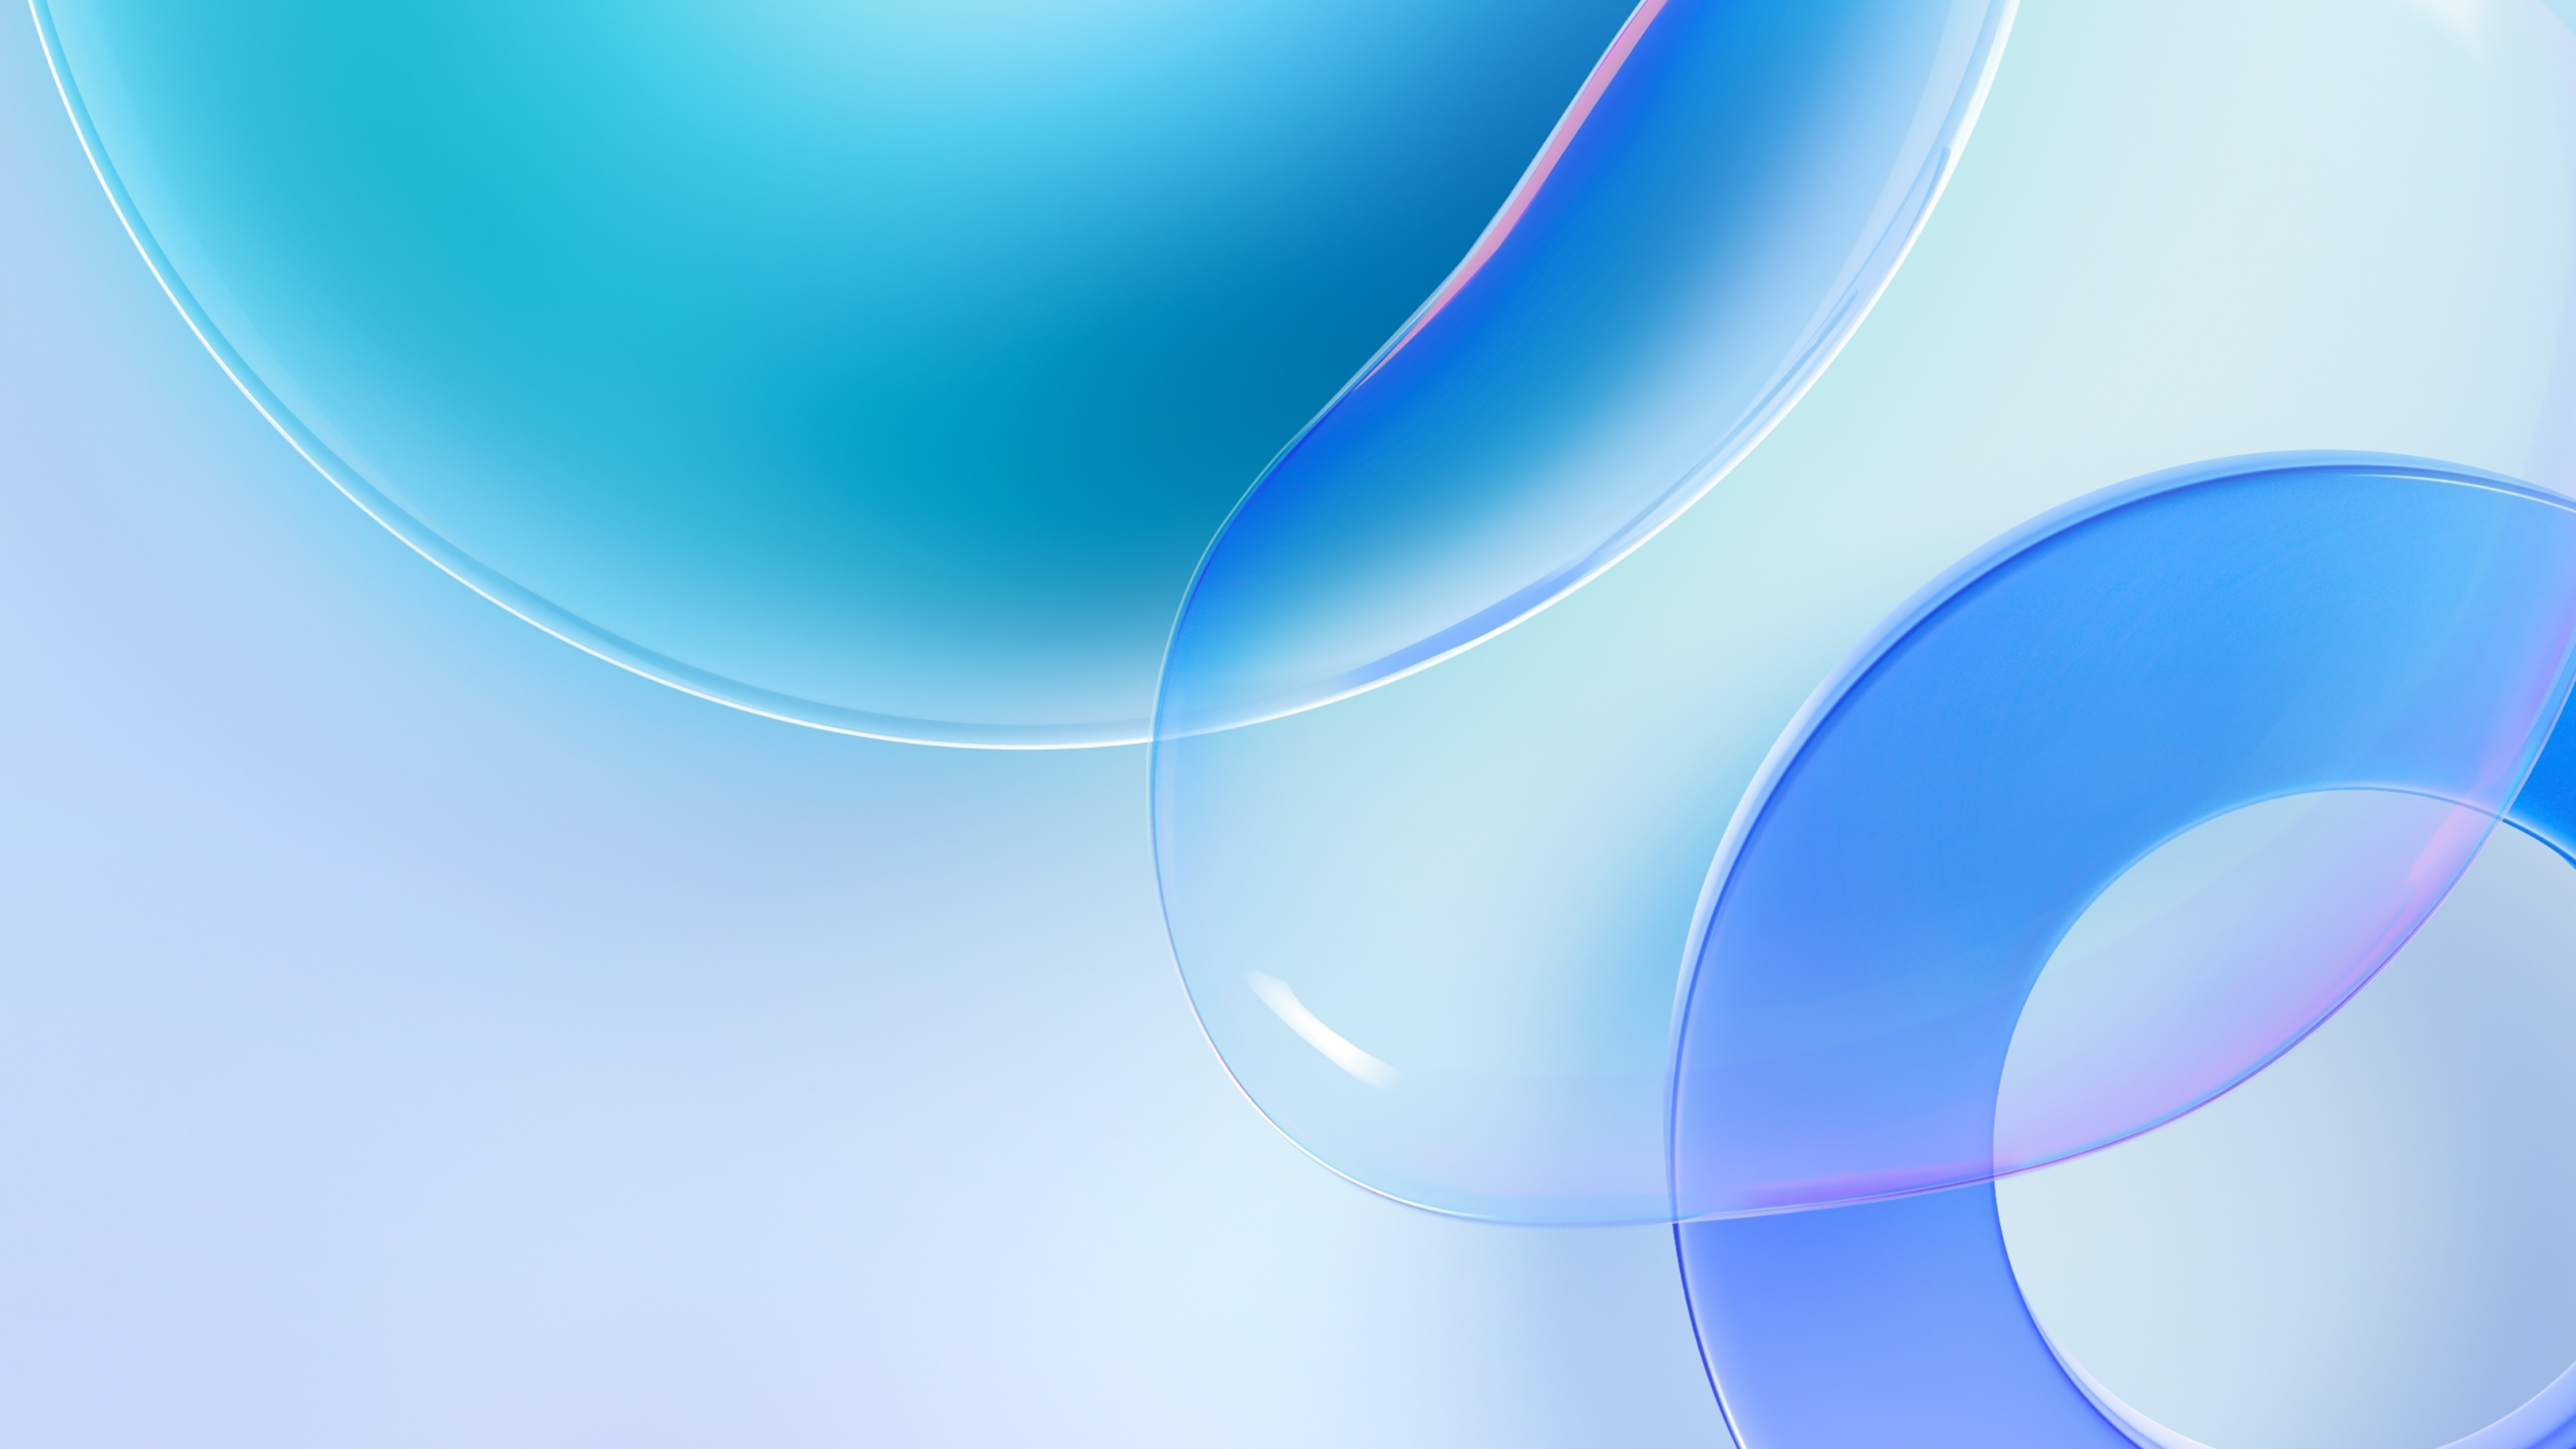 Aesthetic Fluid Wallpaper In Blue Pastel Colors Background Wallpaper Image  For Free Download  Pngtree